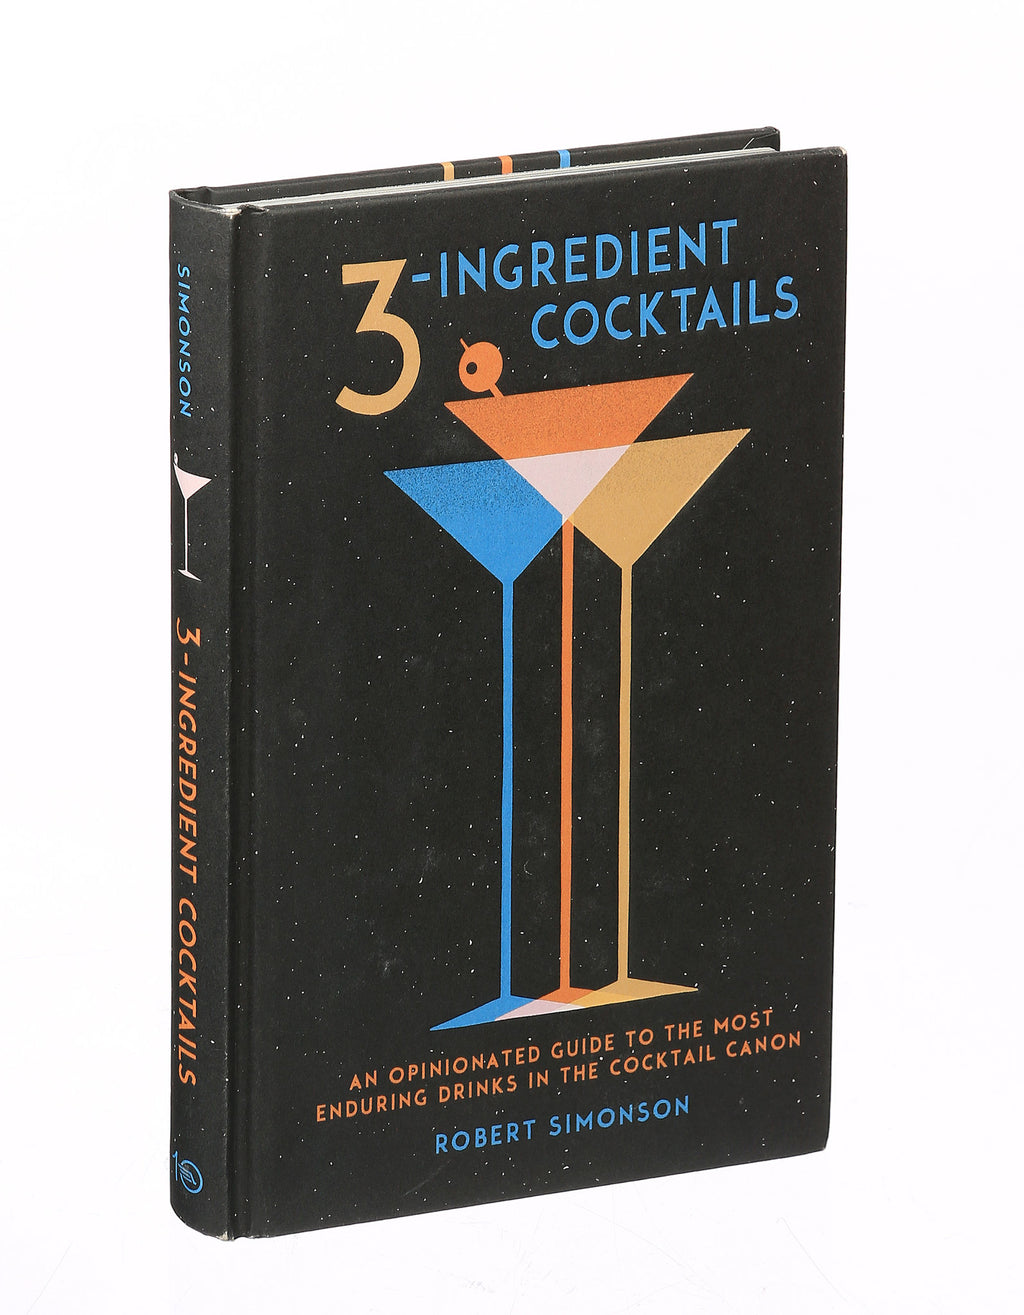 3-ingredient Cocktails By Robert Simonson